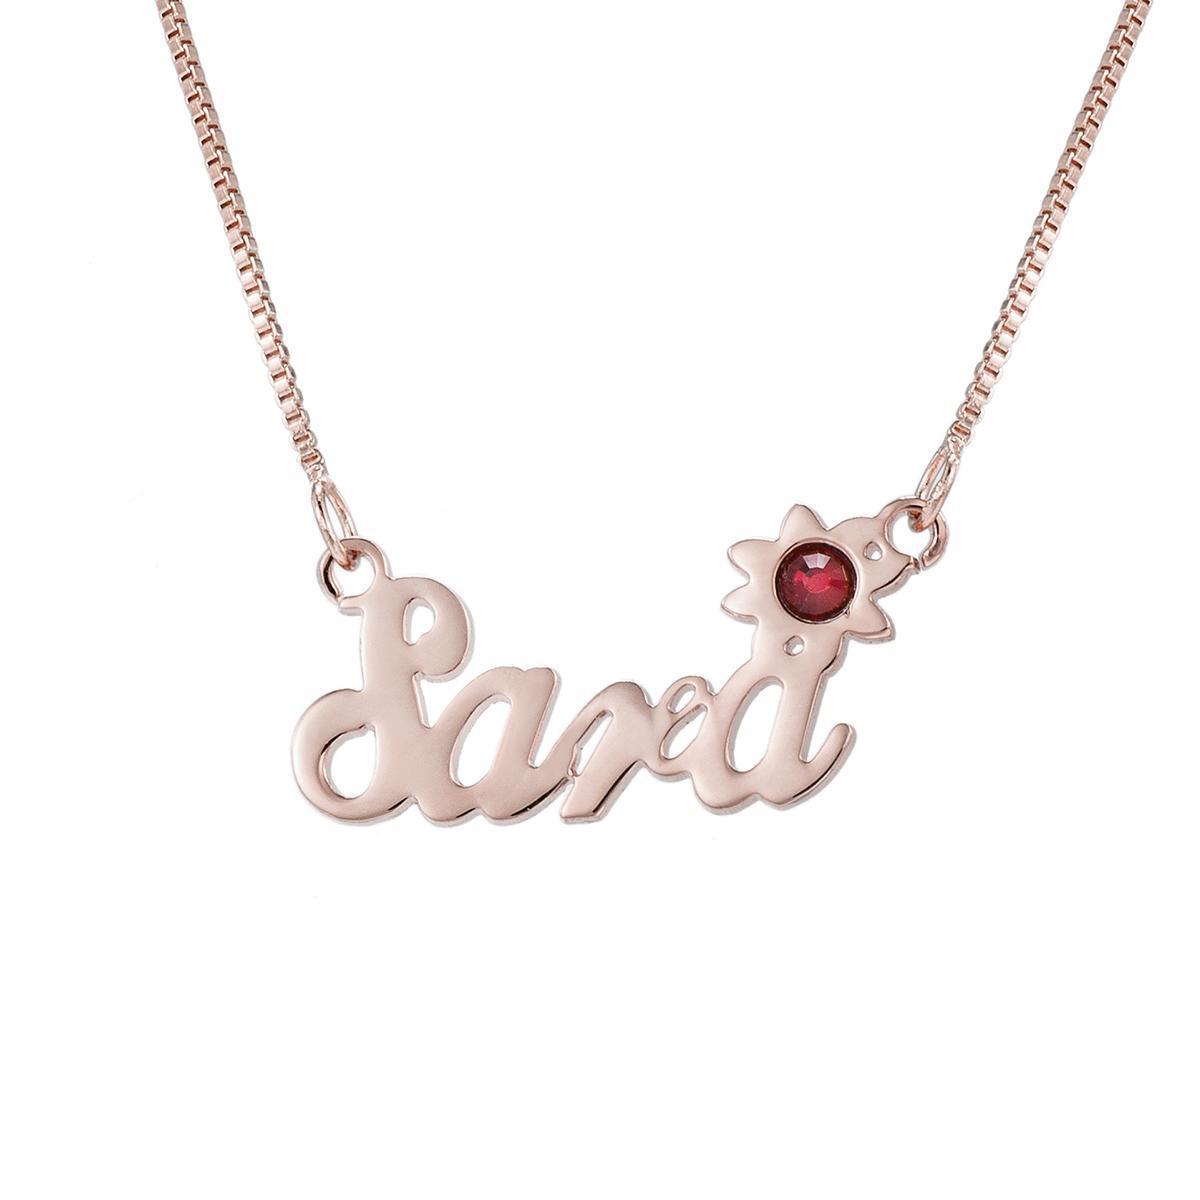 Simple atmosphere Custom Name Necklace